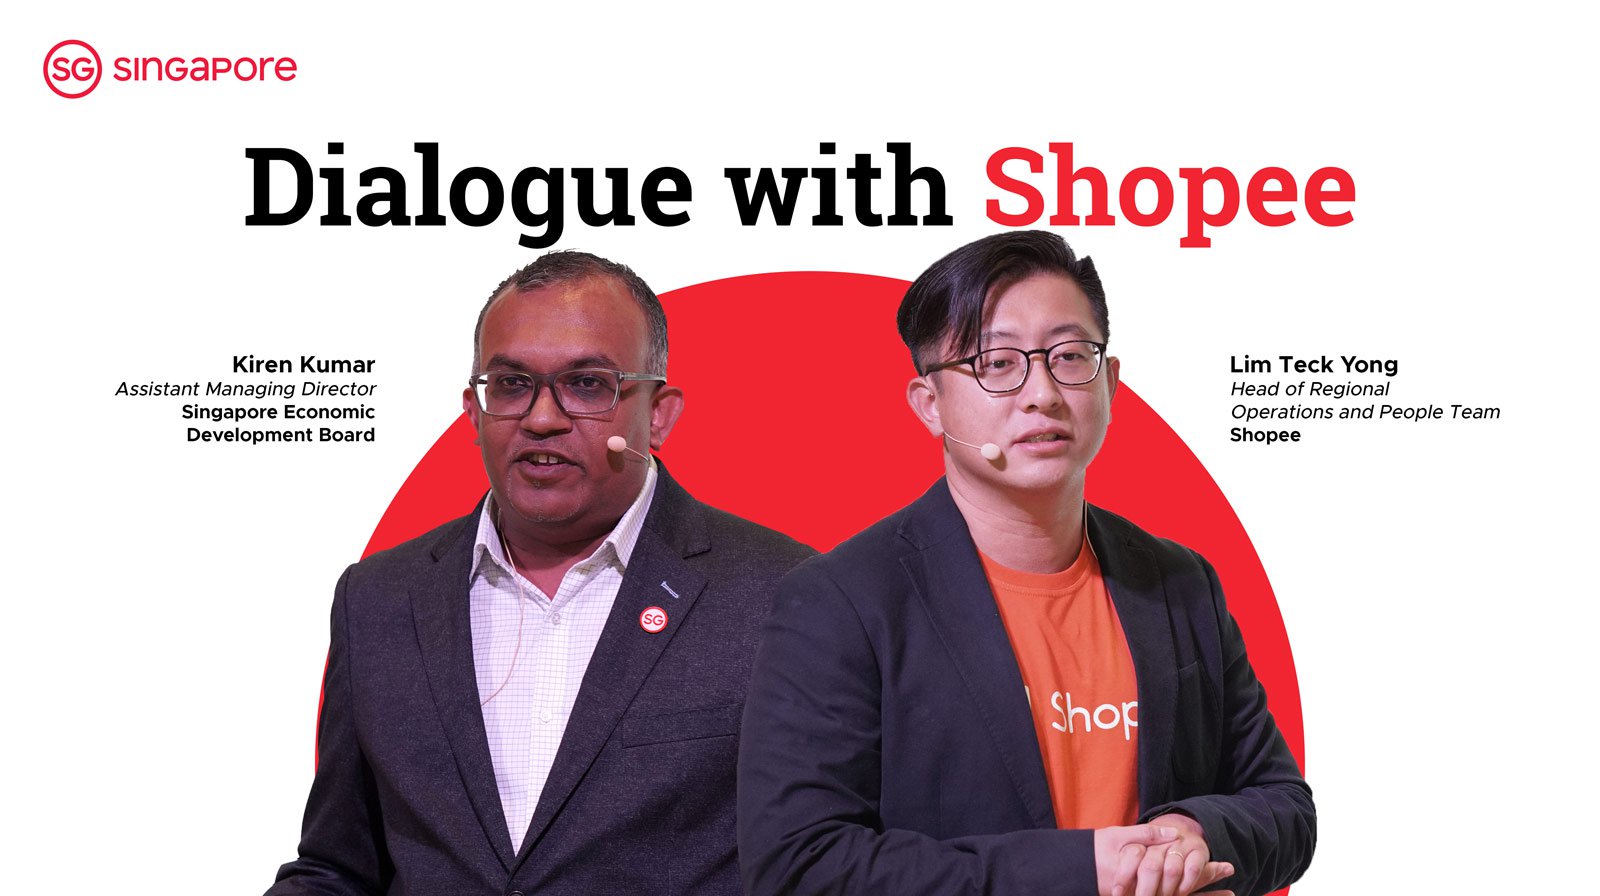 Dialogue with Shopee on Digitalisation in Southeast Asia